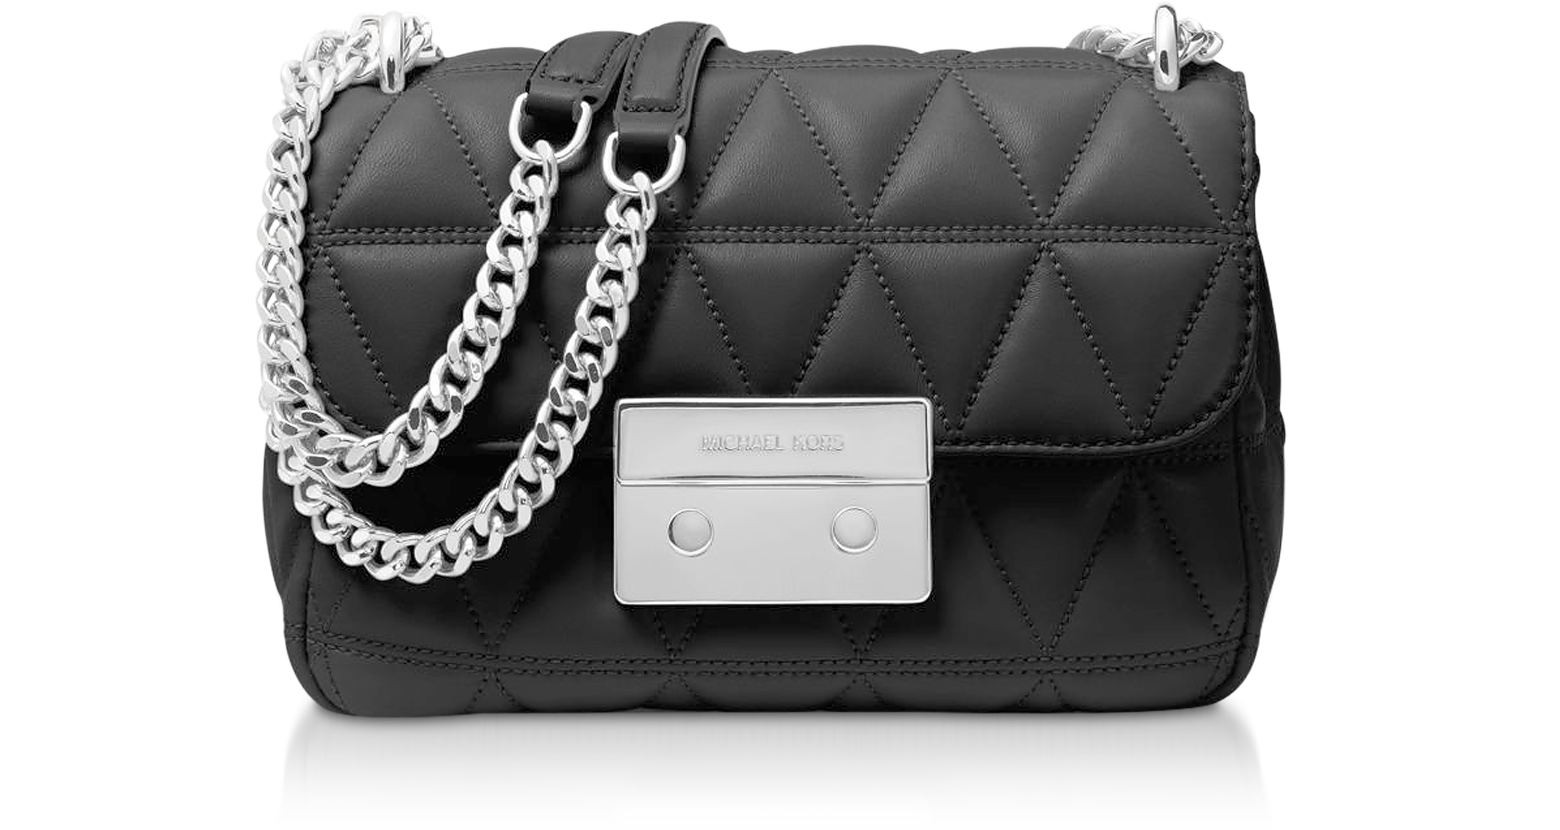 Michael Kors Sloan Small Quilted 